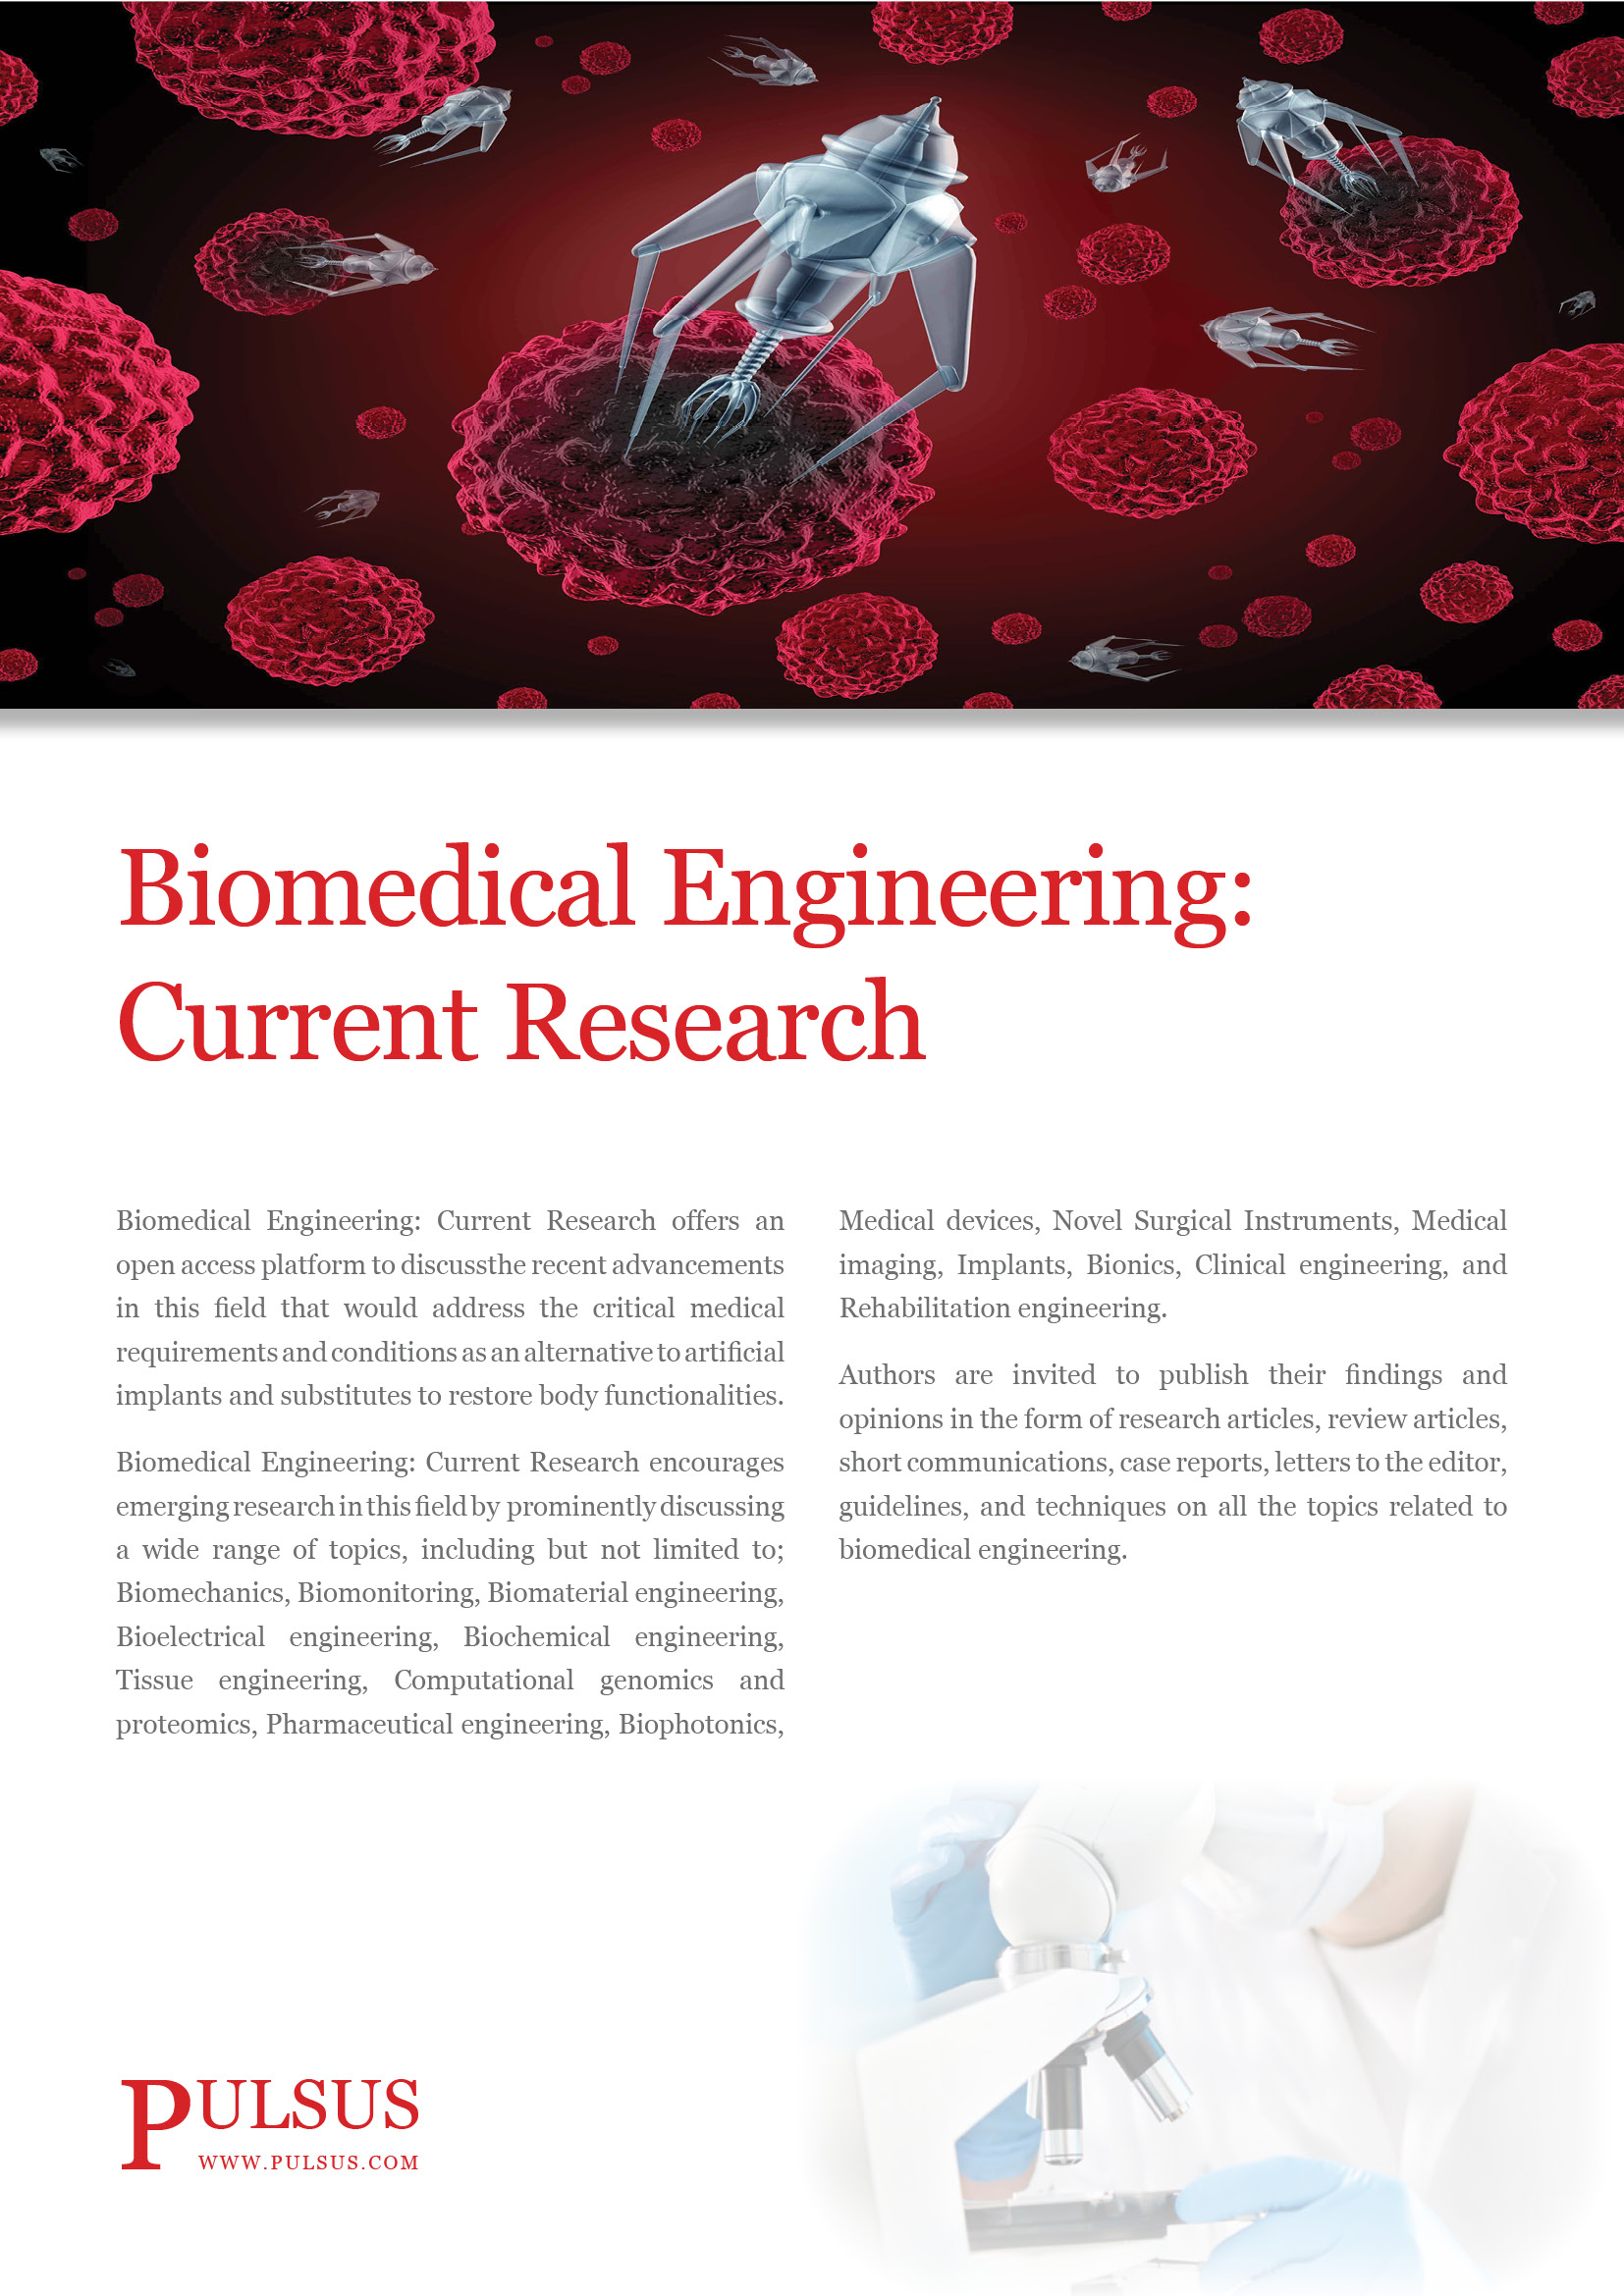 thesis topics for biomedical engineering